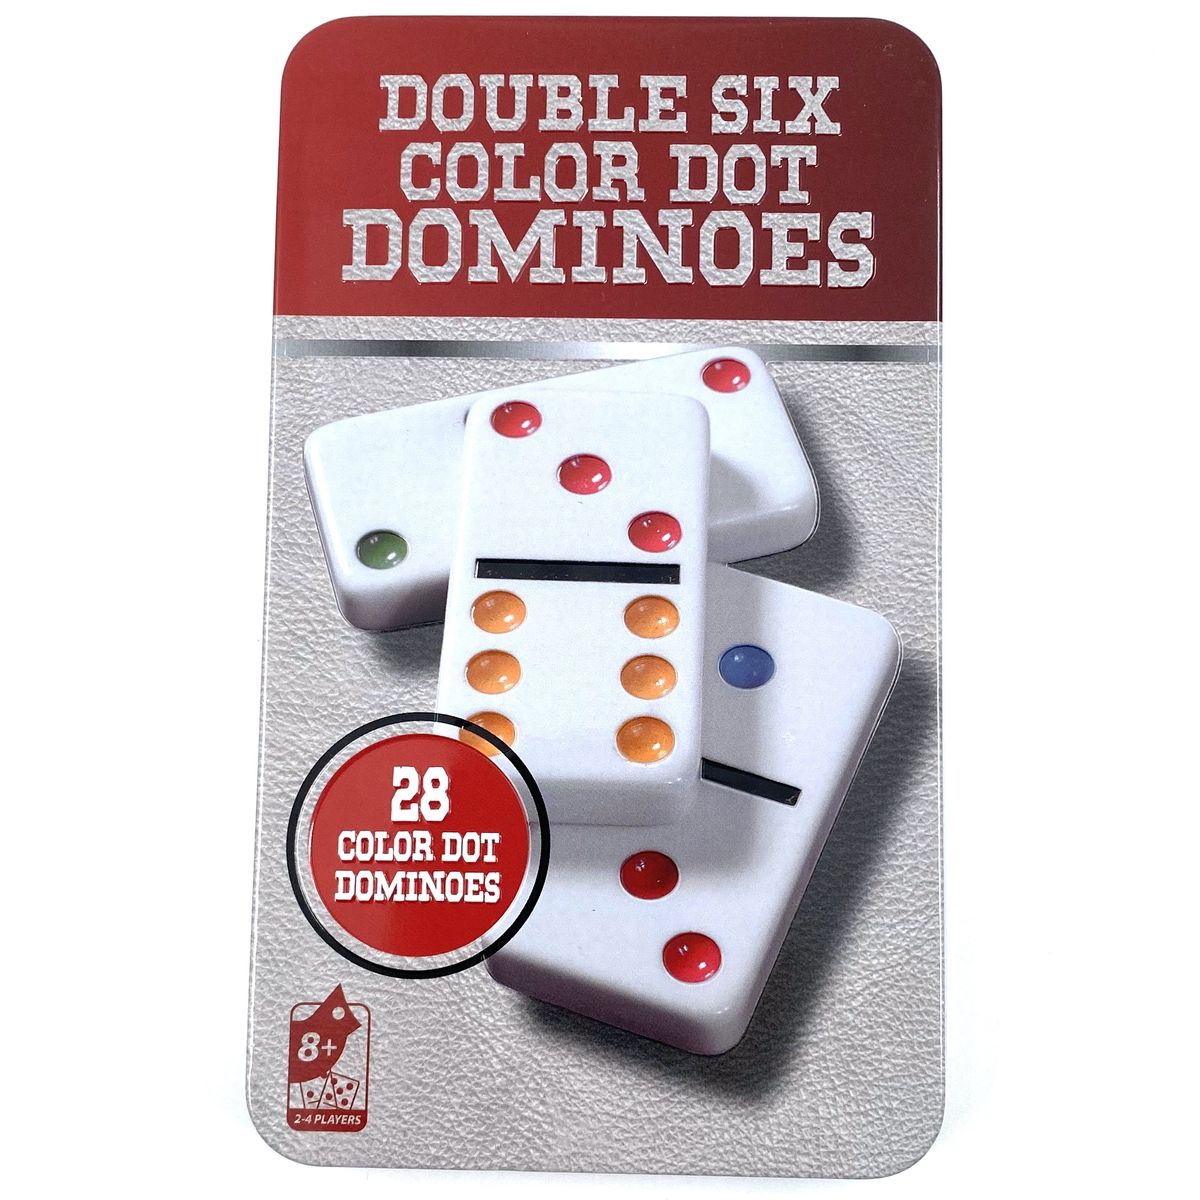 double-six-color-dot-dominoes-domino-boardgame-buy-online-in-south